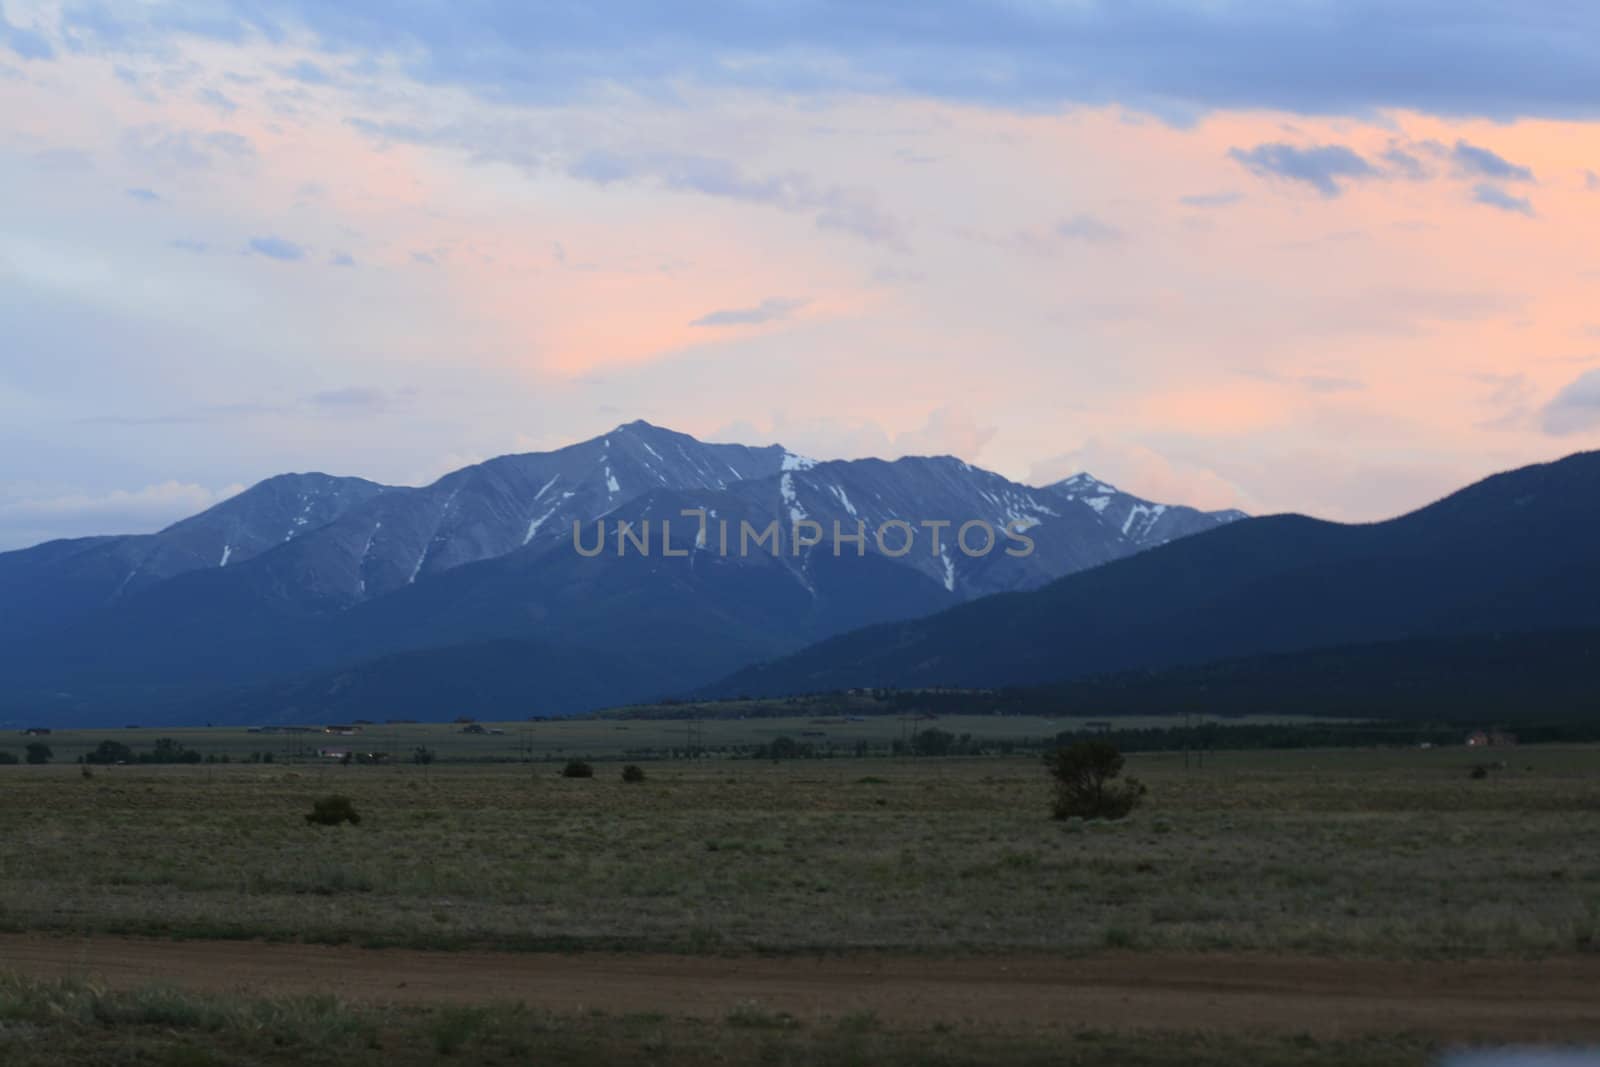 Colorado Mountains at sunrise, midday and sunset